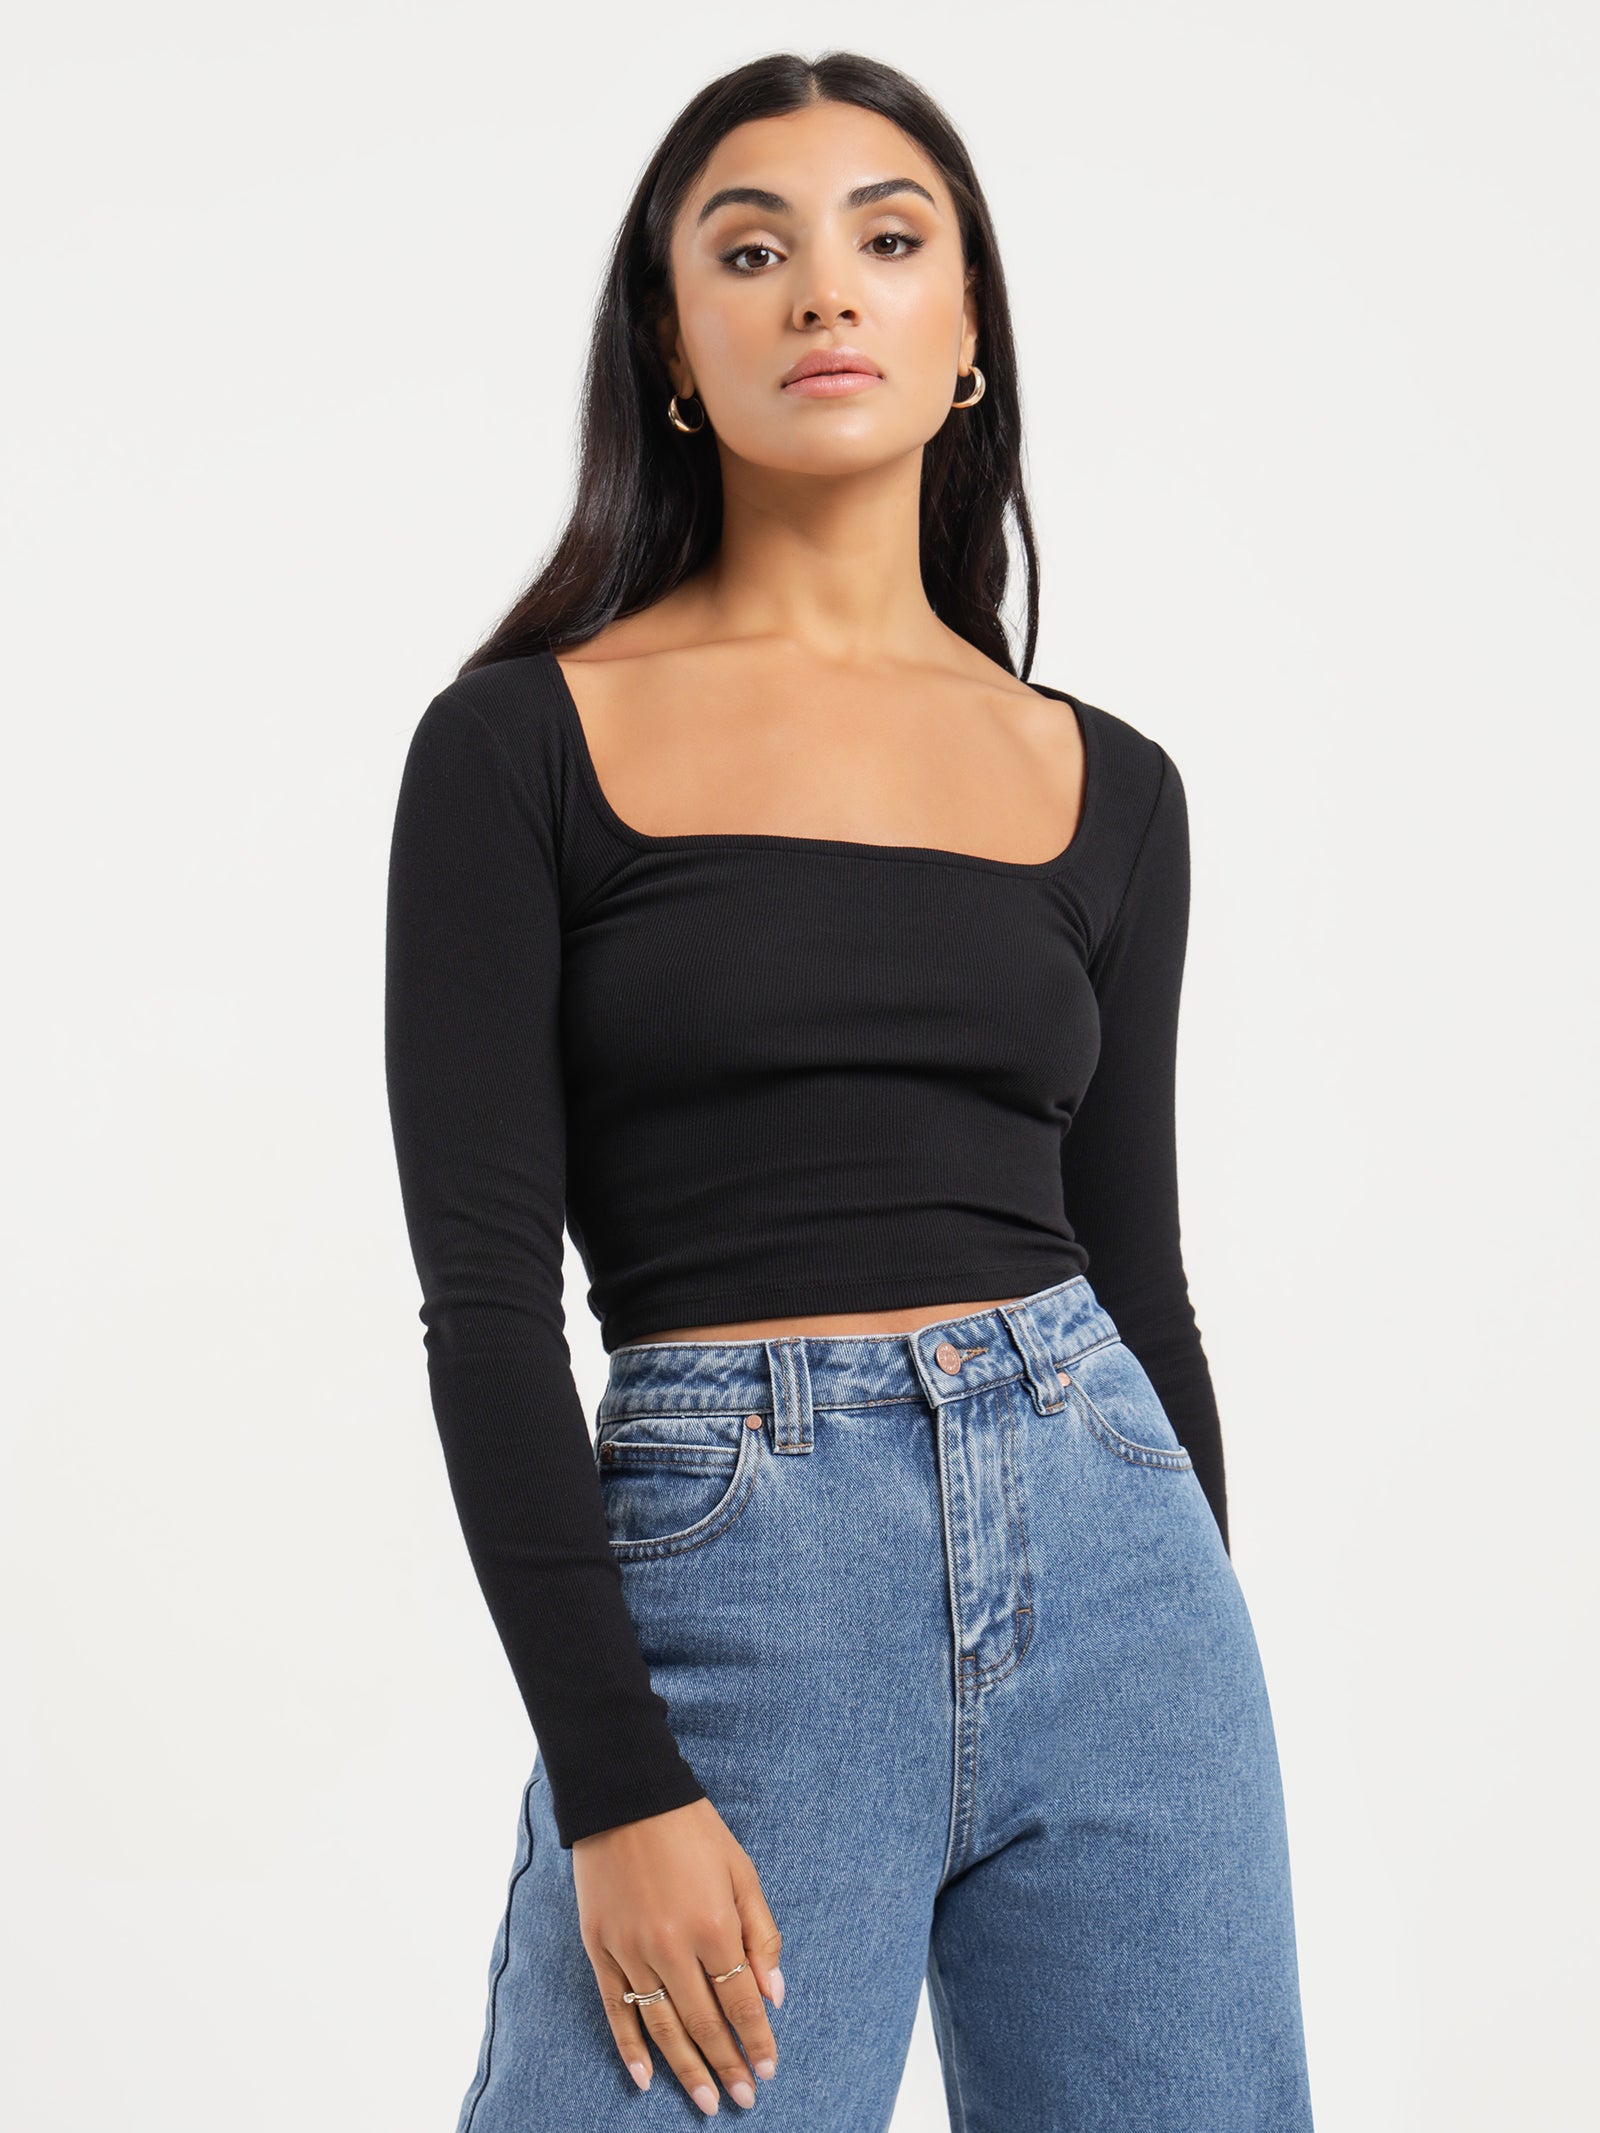 Marley Square Neck Top in Black - Glue Store